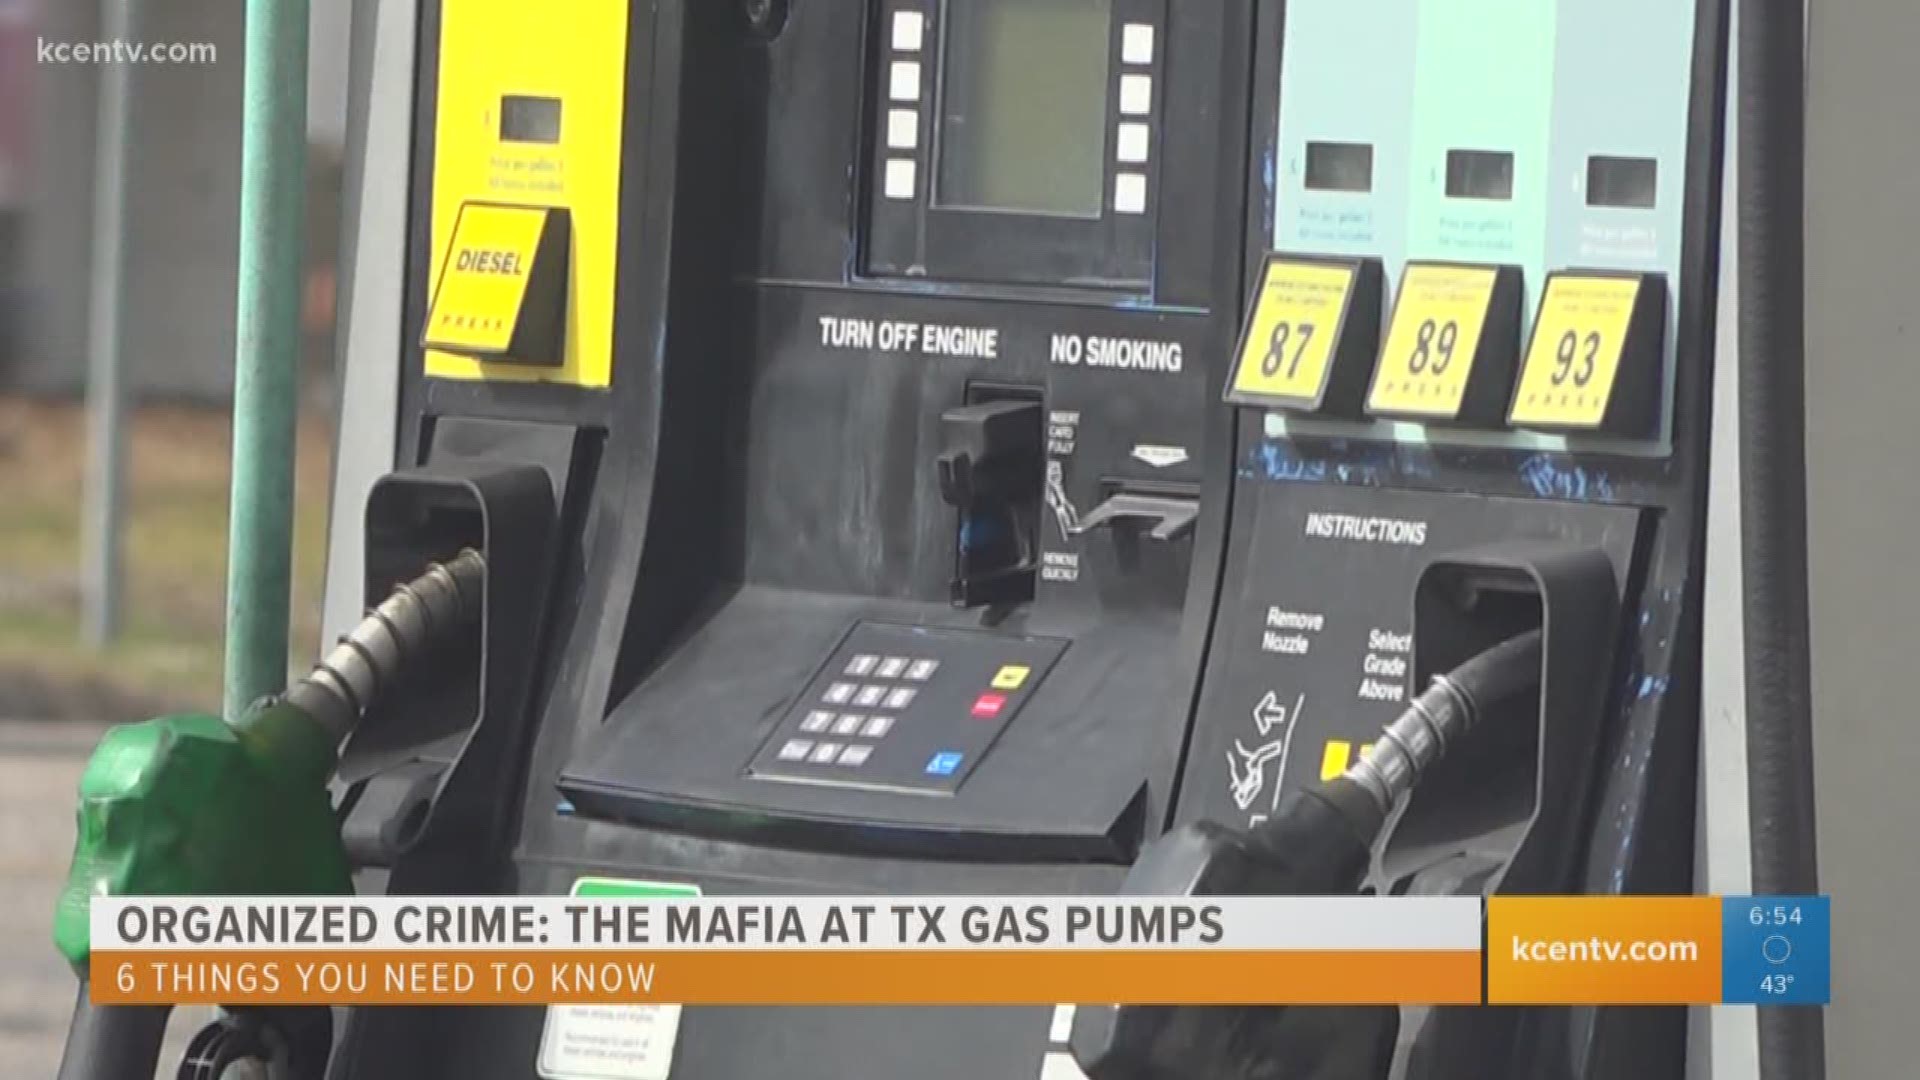 Before you go, there are 6 things you should know. Here's one of them: A credit card skimmer was found on a pump at a Waco gas station Tuesday.